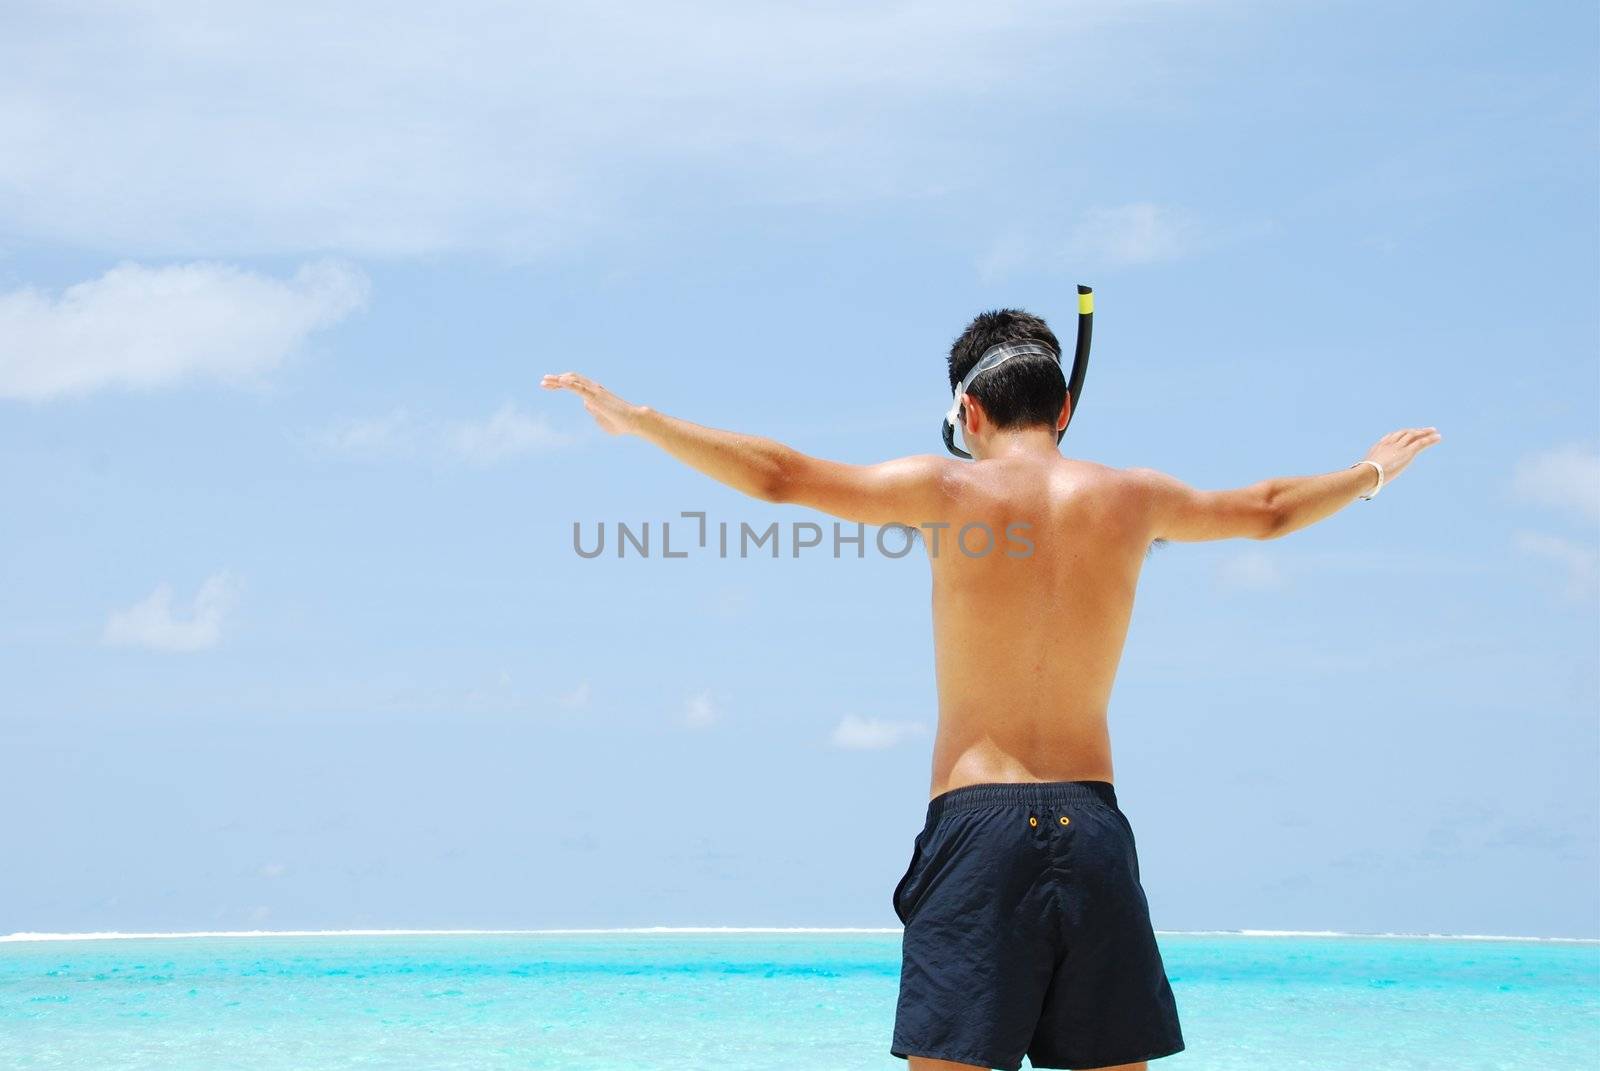 man getting ready to go snorkeling in a tropical island